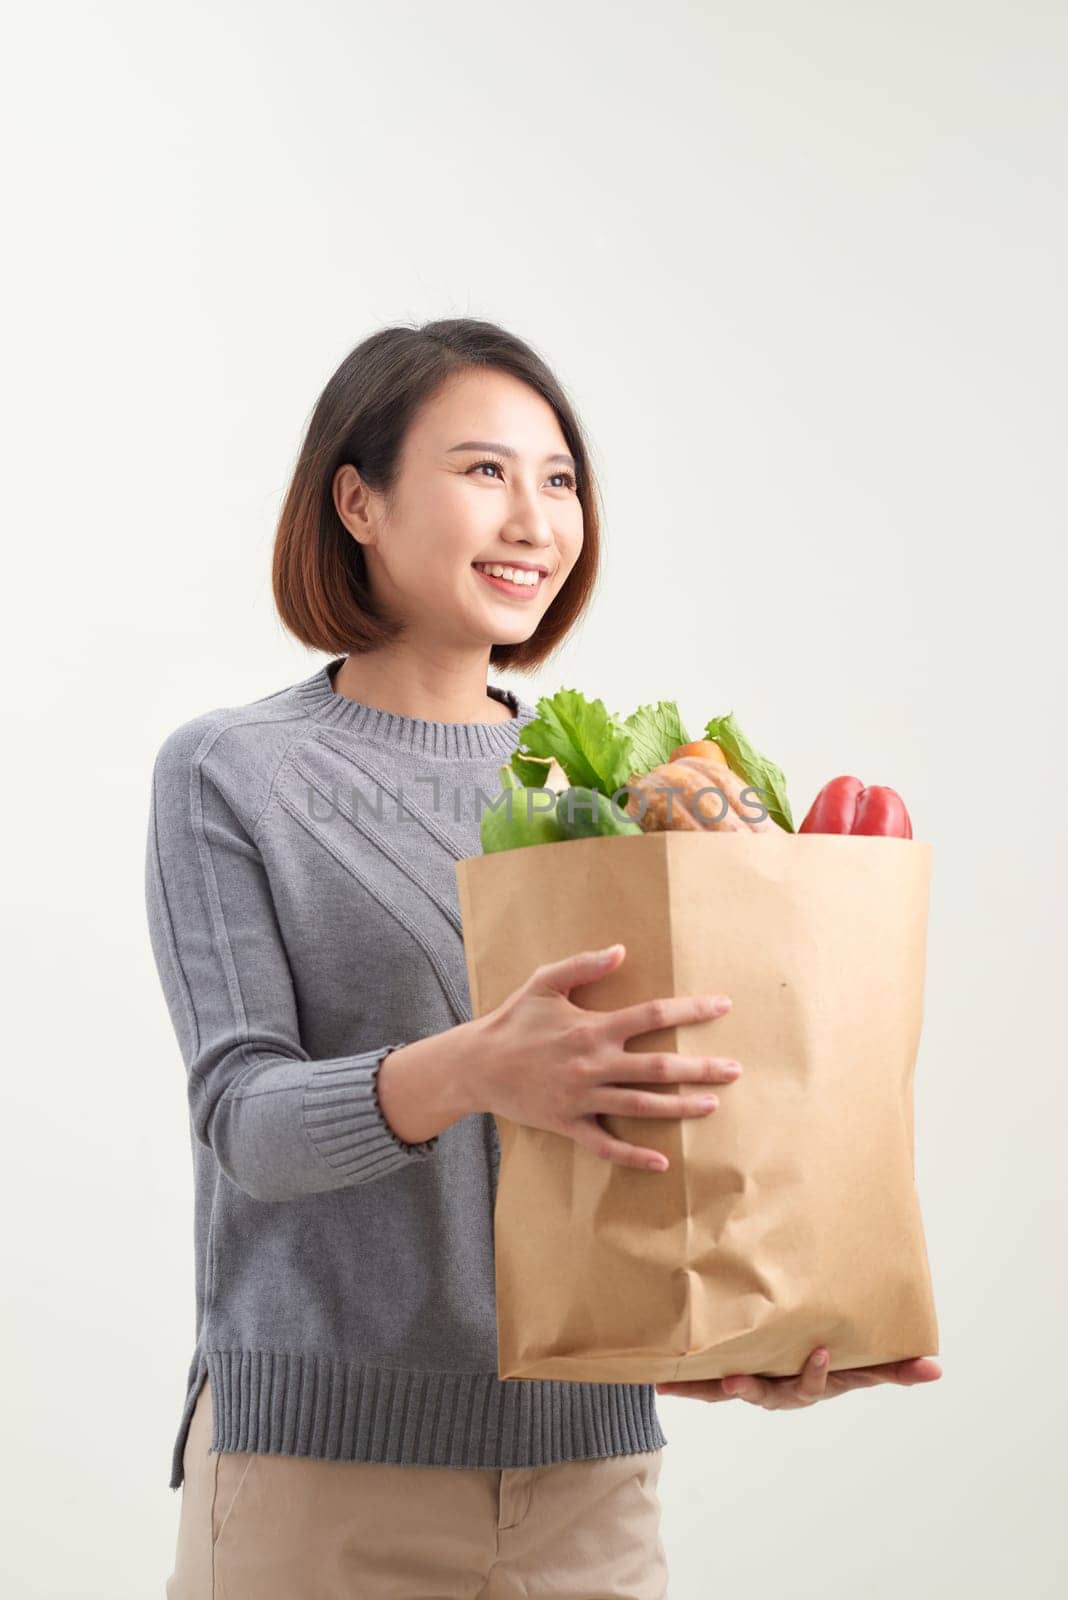 Portrait Of Happy Young Woman Holding Grocery Bag Over White Background by makidotvn